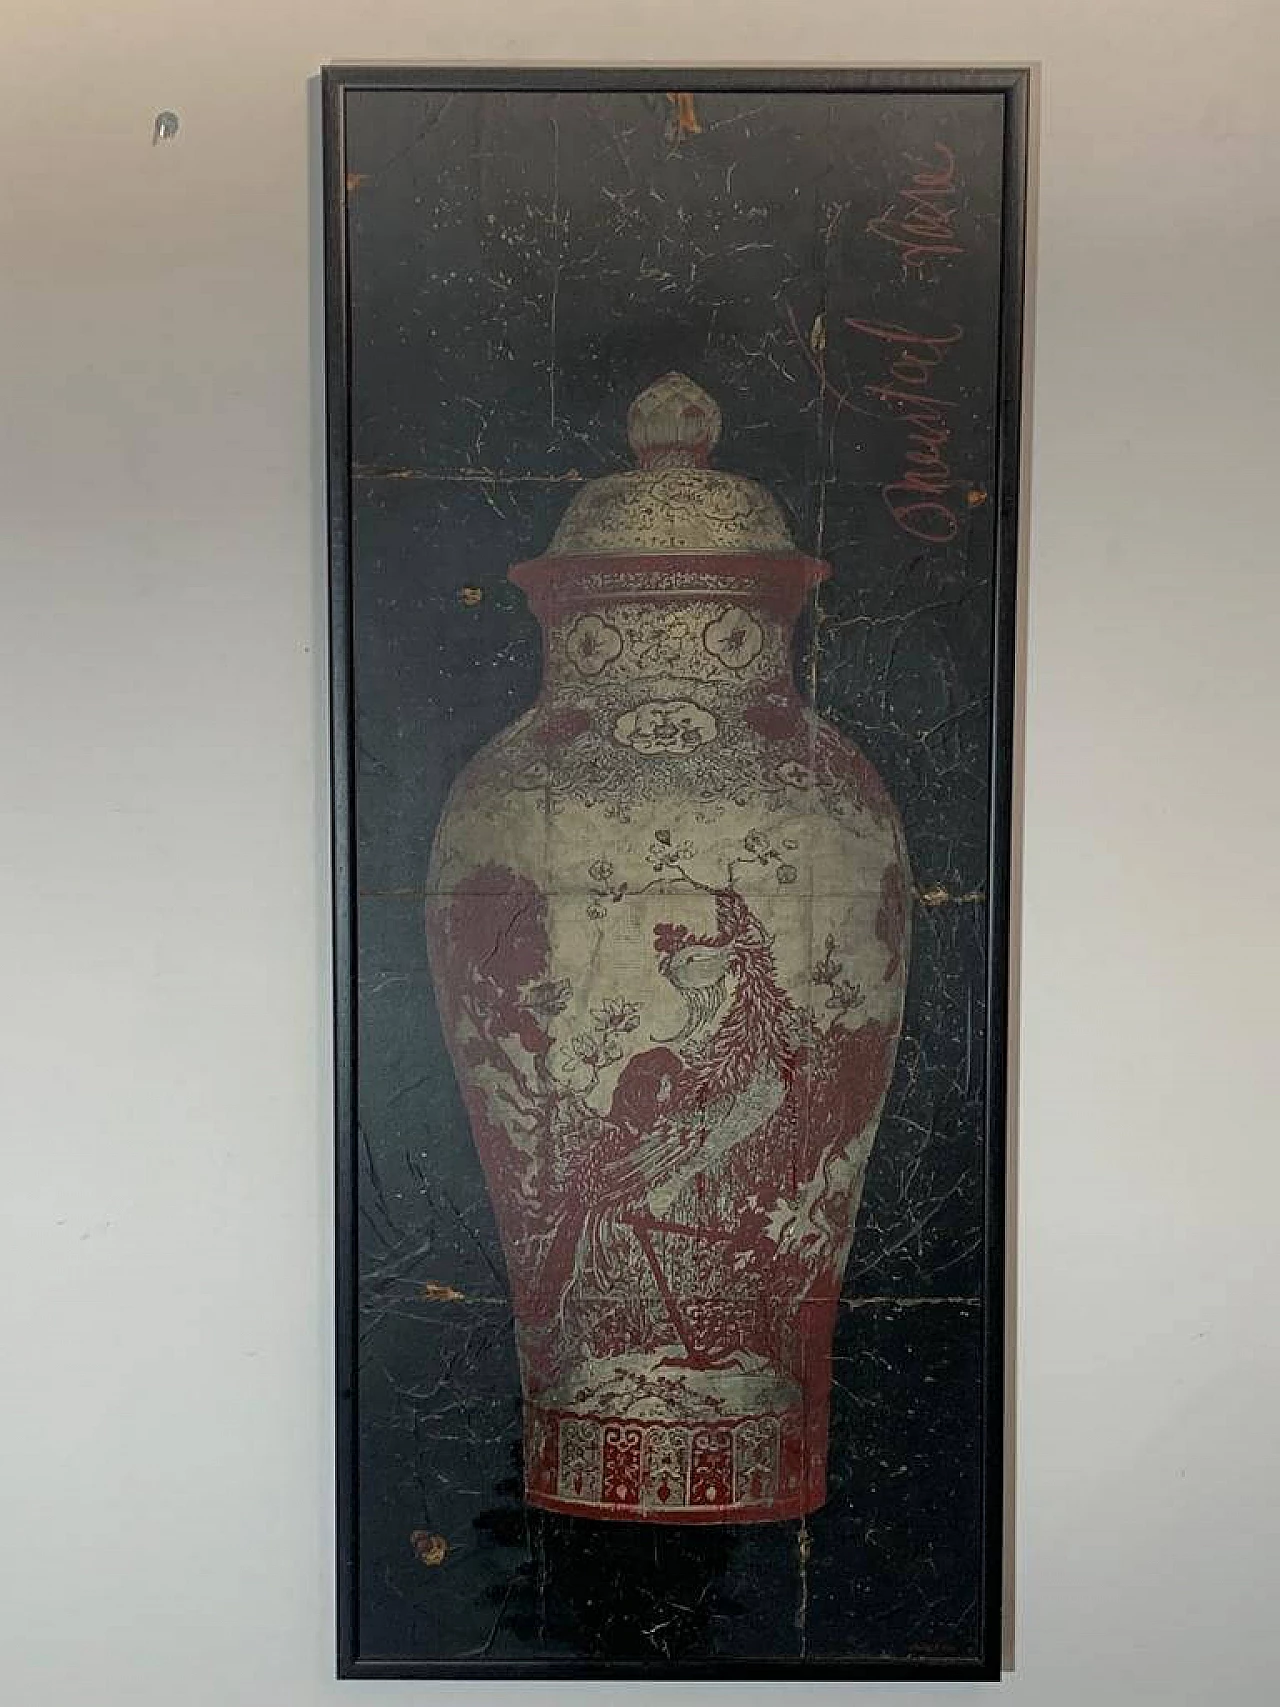 Painted silkscreen on rice paper depicting a vase with lid, 1960s 1